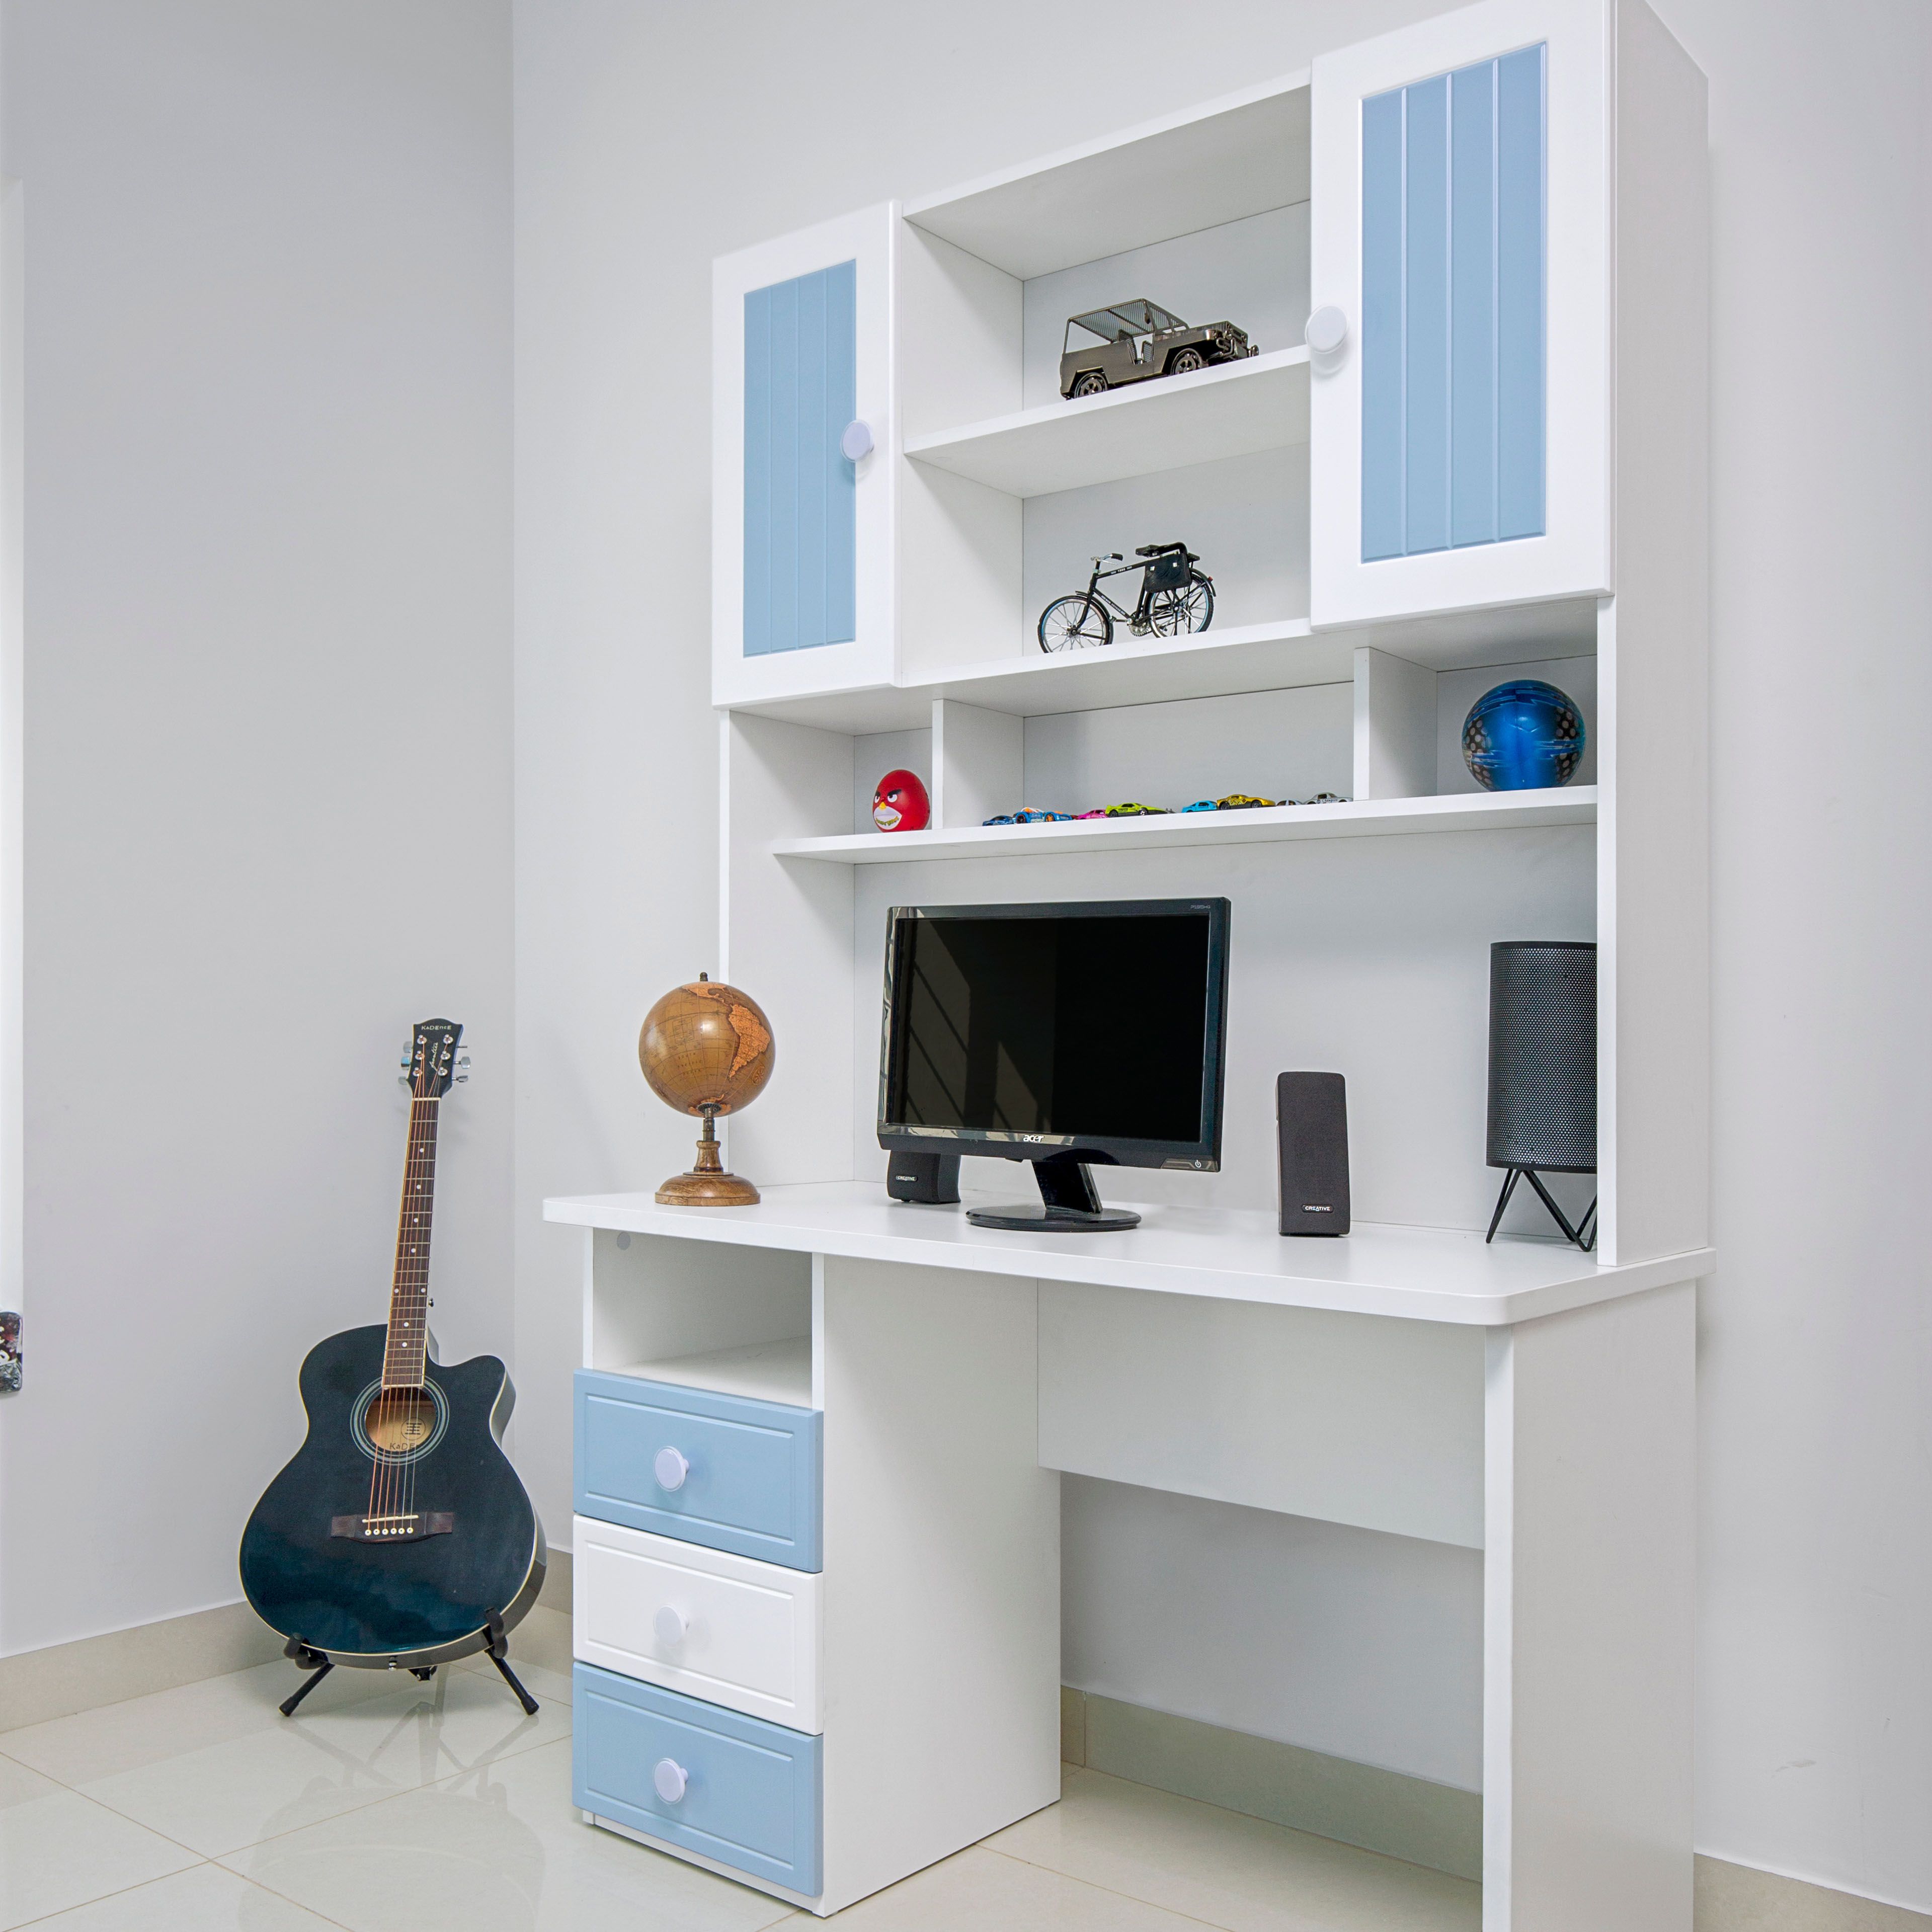 Contemporary Blue And White Home Office Design With Open And Closed Storage